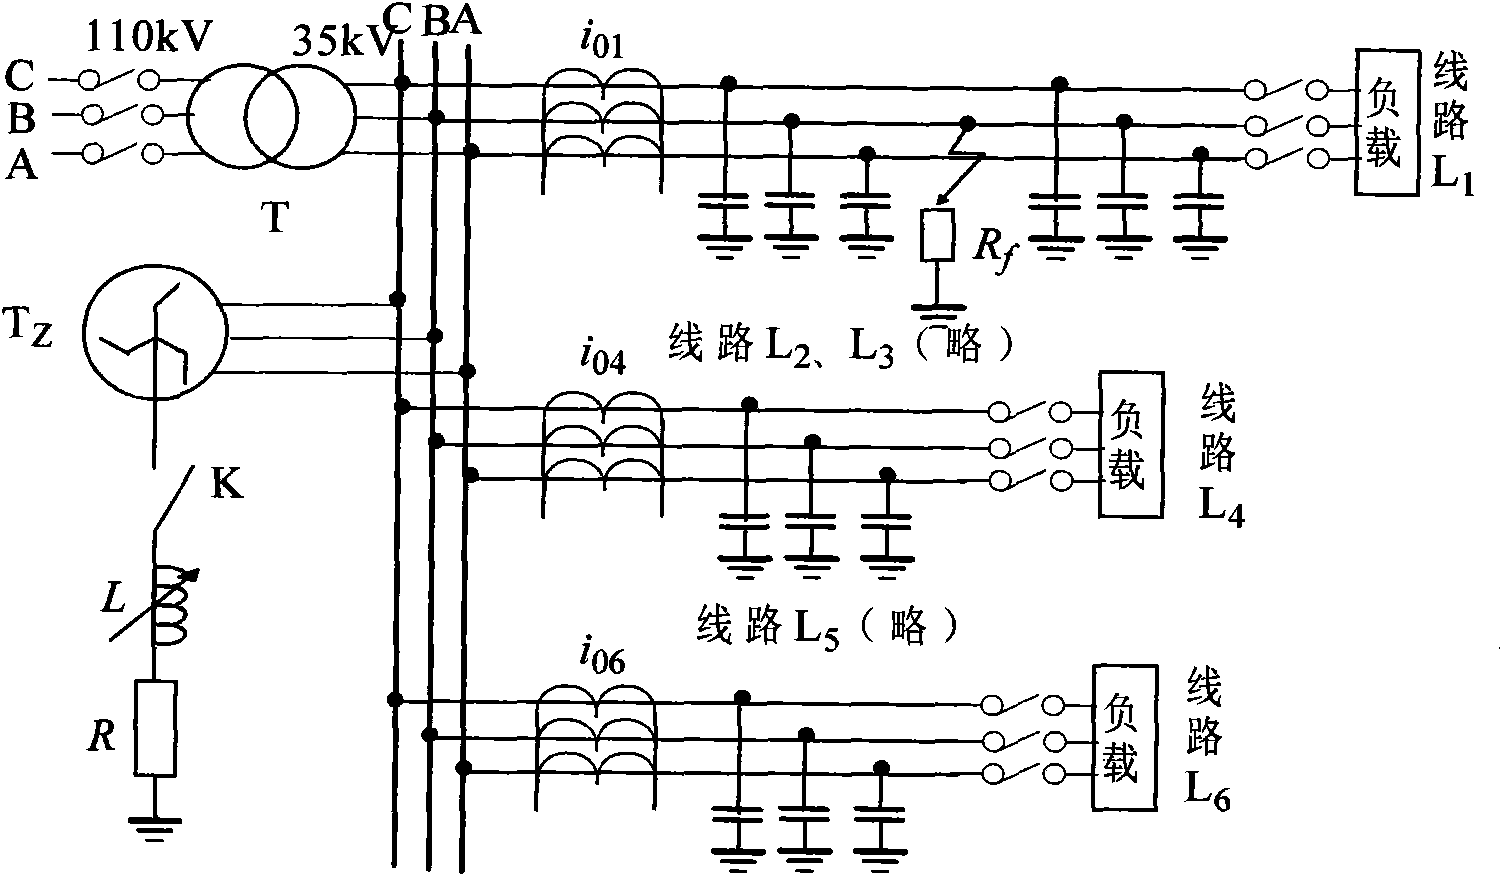 Fault line selection method for resonant grounded power distribution system by pattern spectrum